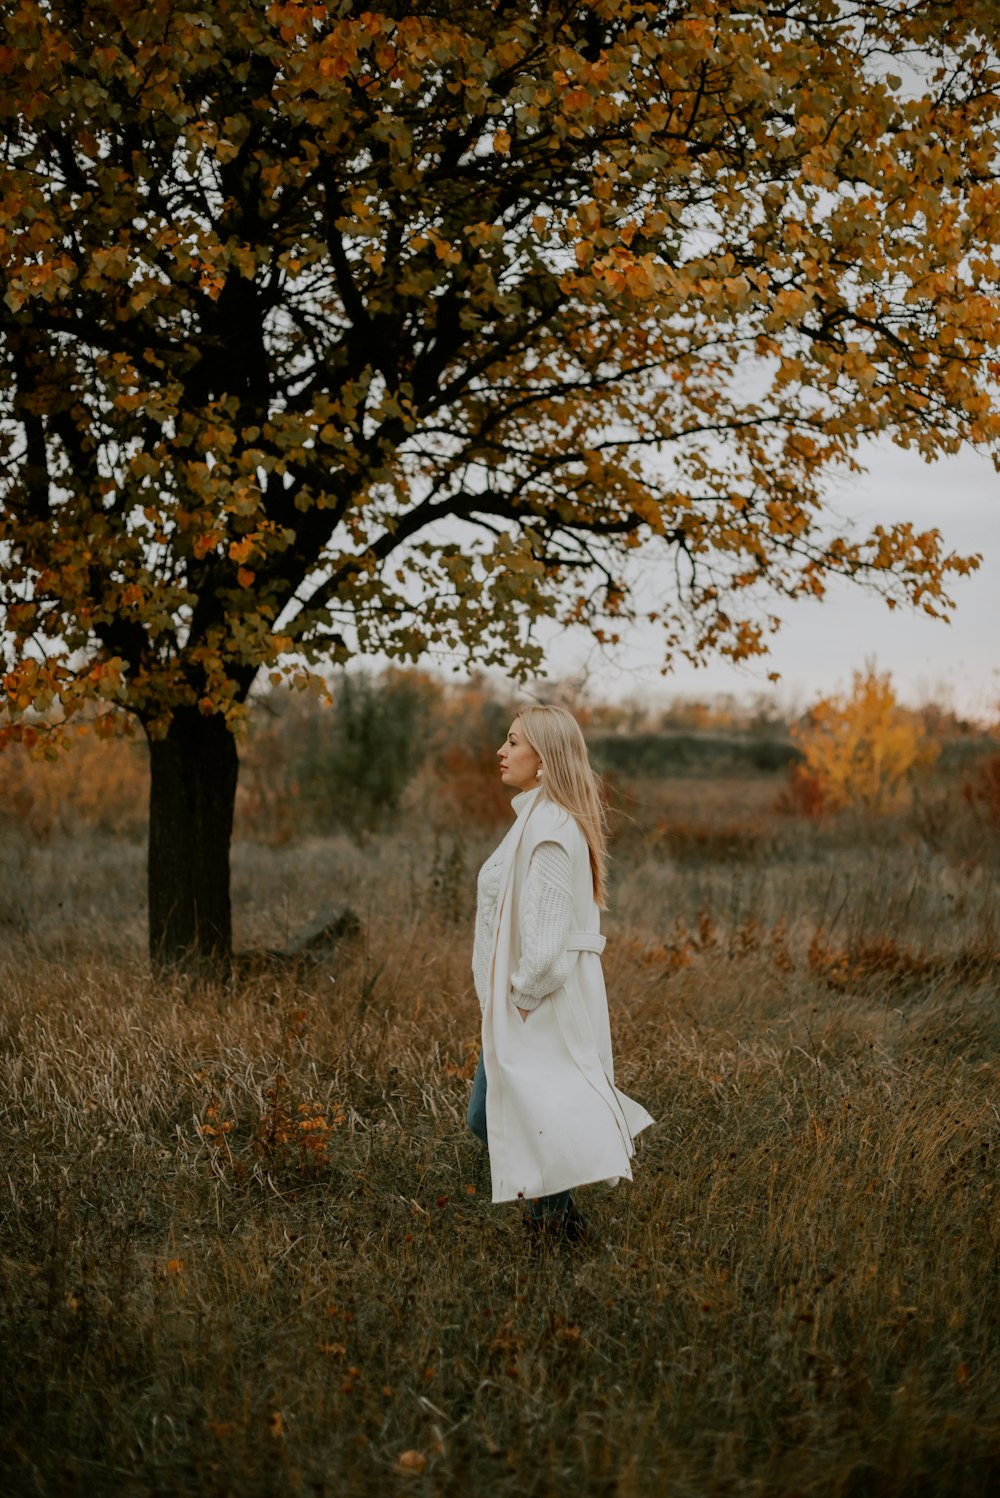 a person standing in a field with a tree in the background